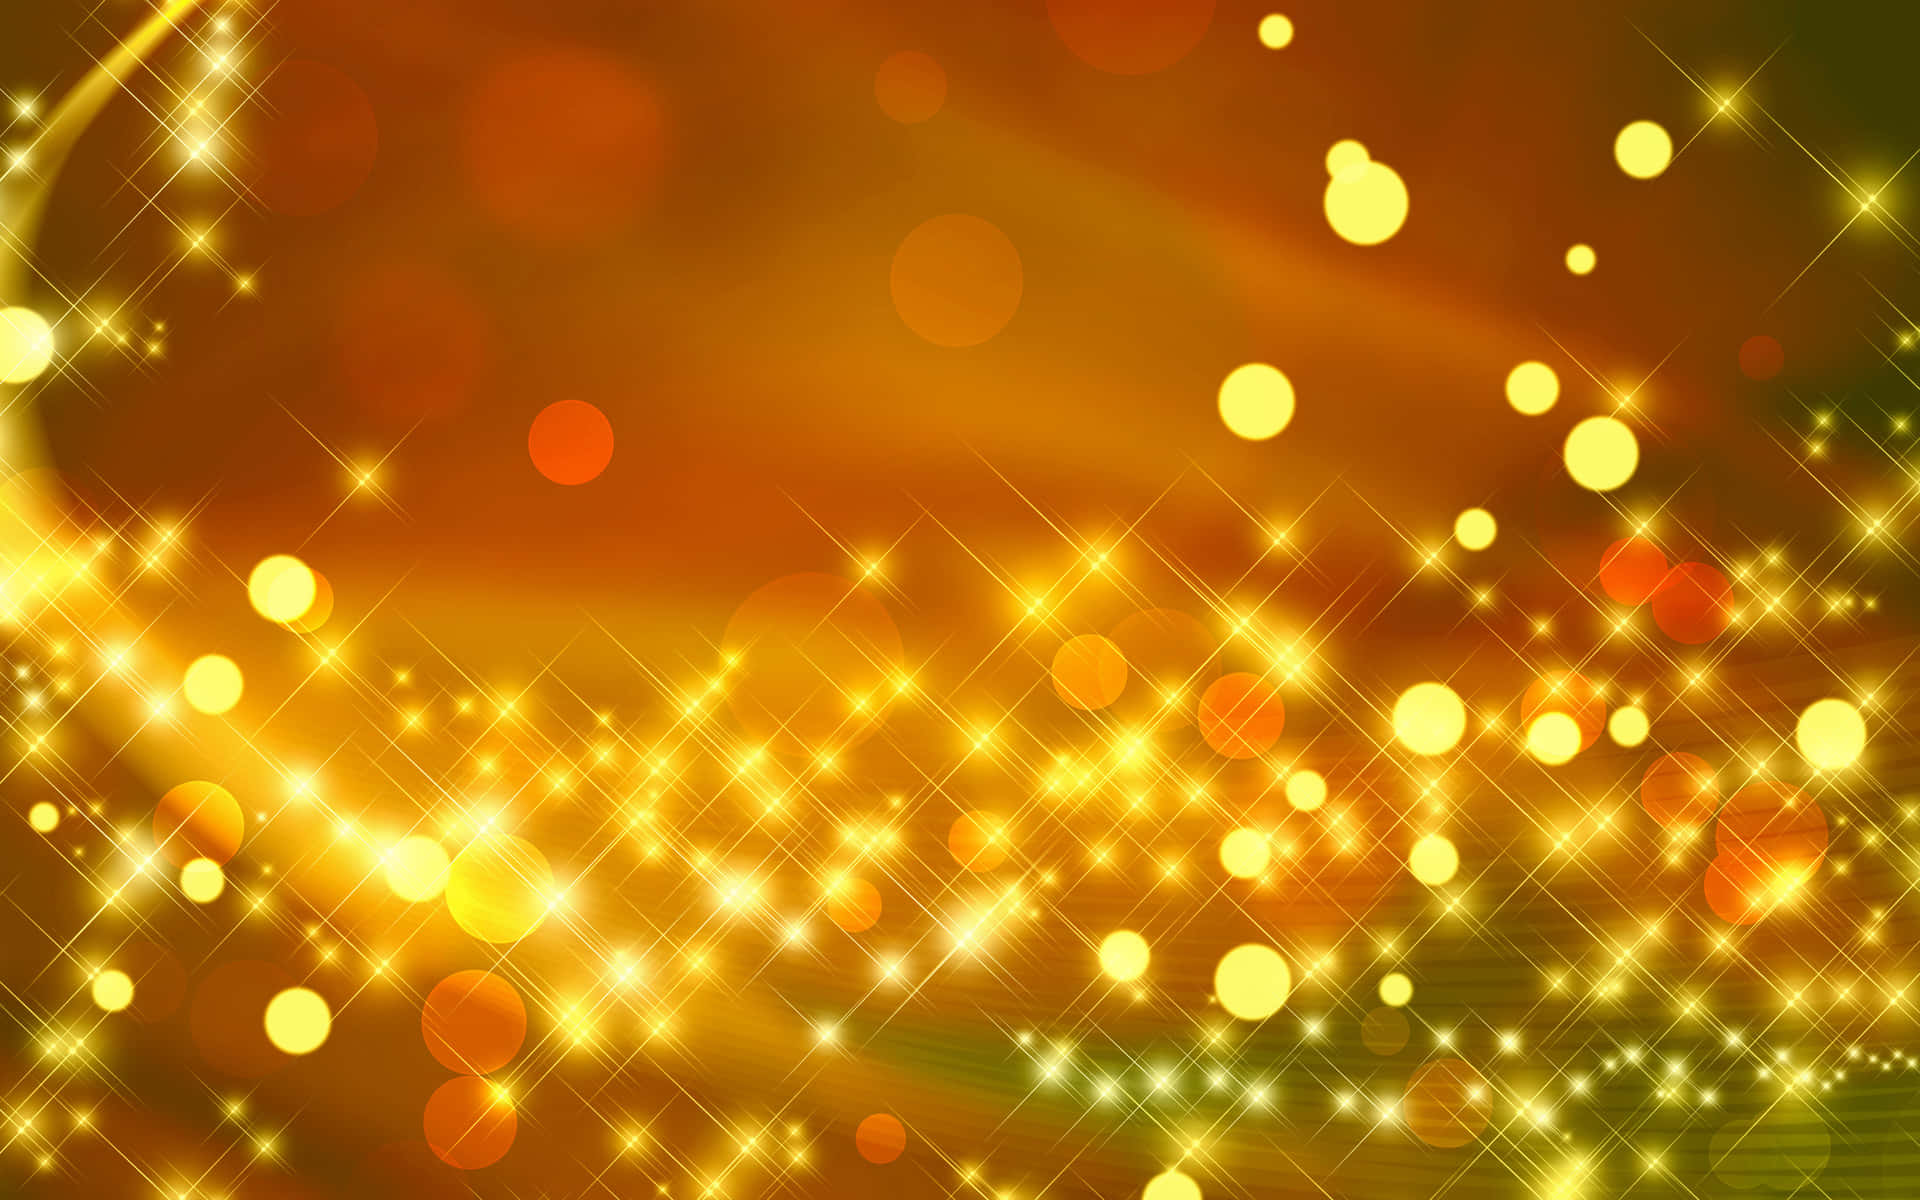 A Golden Background With Lights And Bokeh